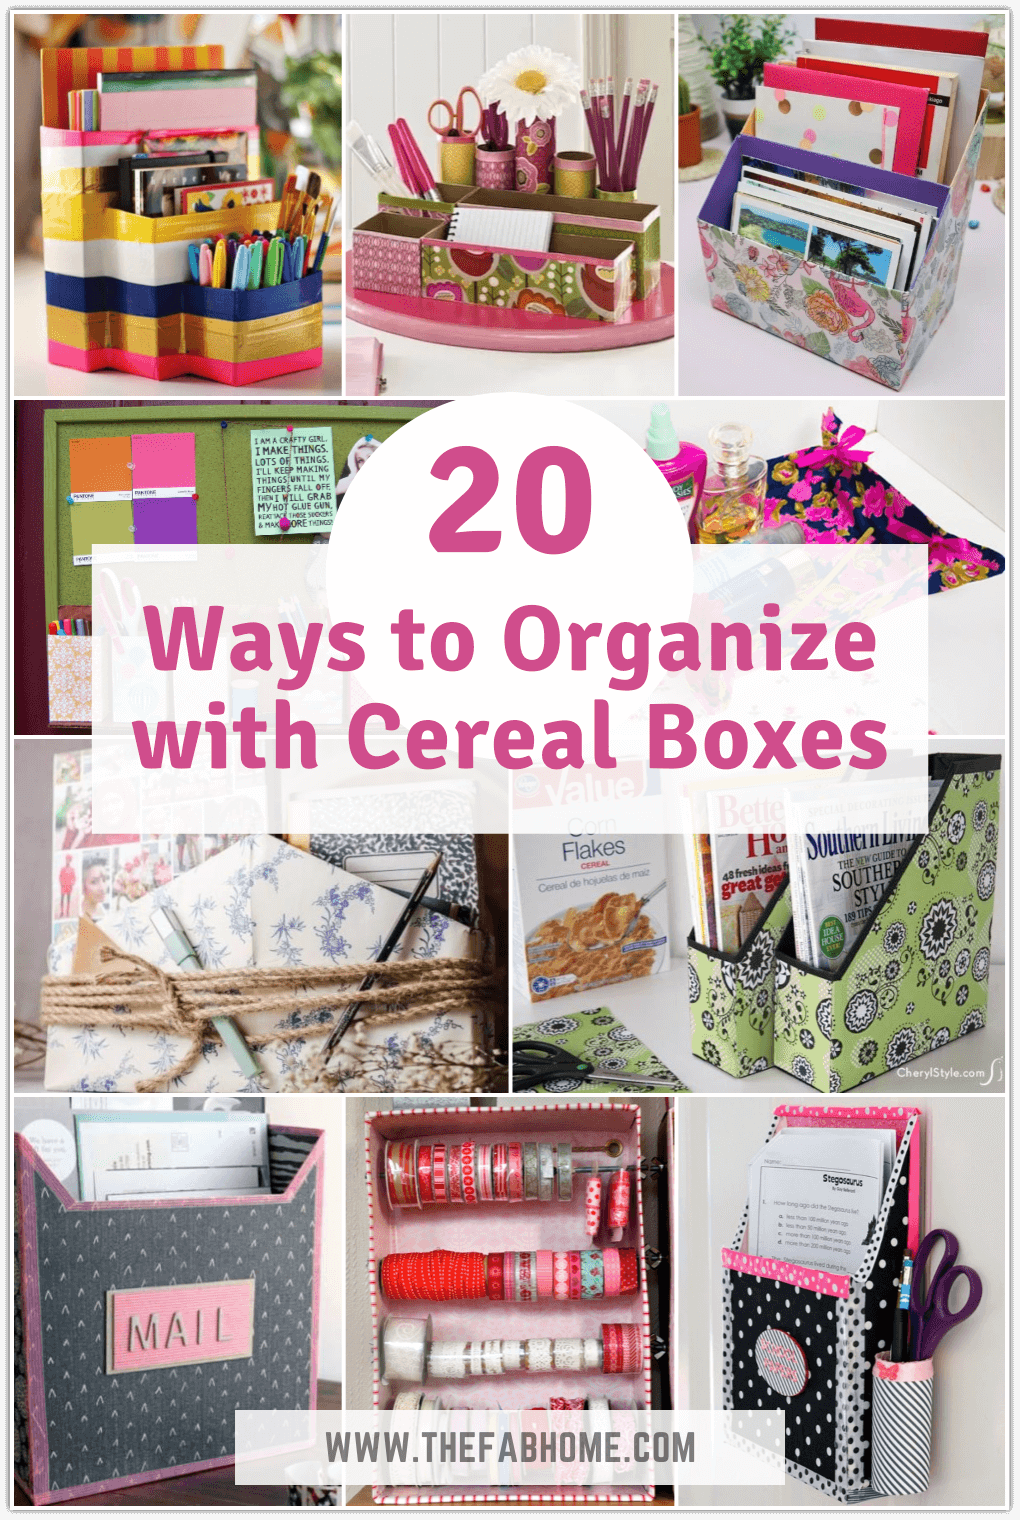 20 Genius Ways to Organize with Cereal Boxes